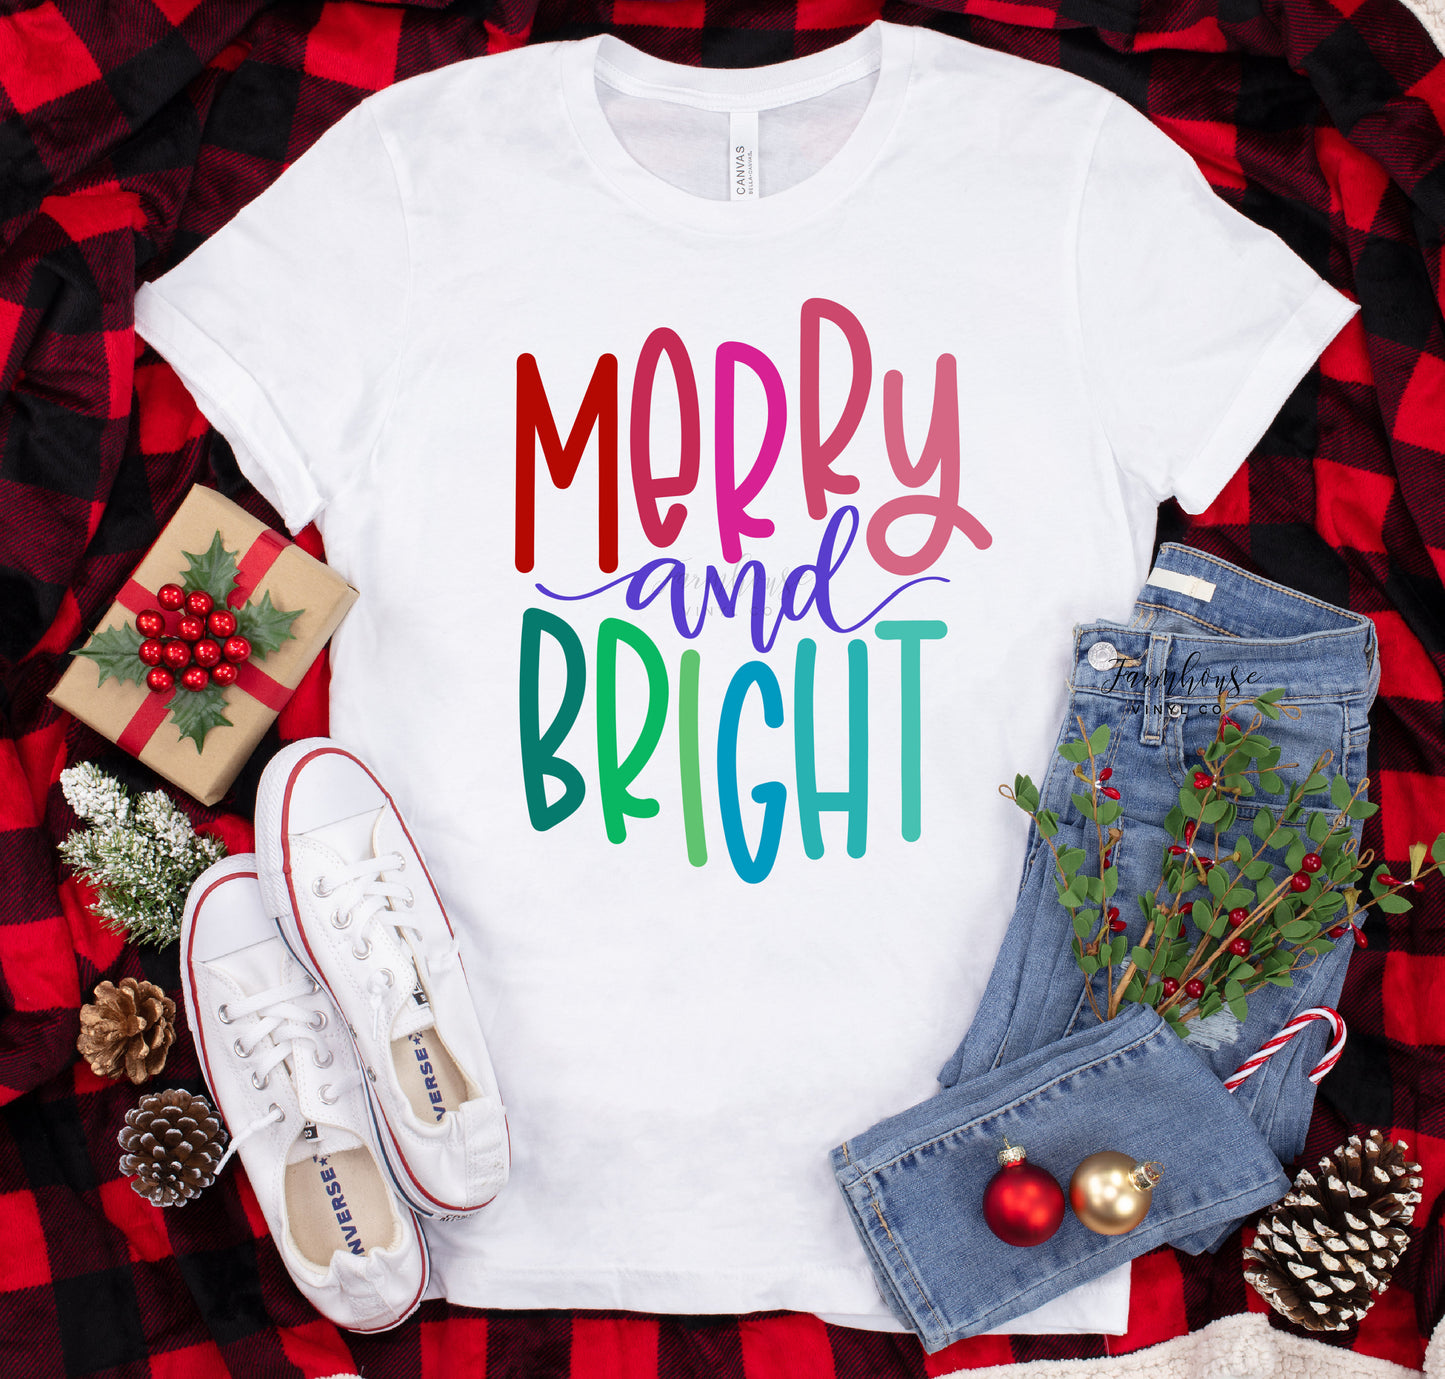 Christmas Unisex Bella Canvas T-Shirt~Christmas Shirts~Most Wonderful Time of the Year~Hot Cocoa~Christmas Lights~Merry and Bright Shirt - Farmhouse Vinyl Co